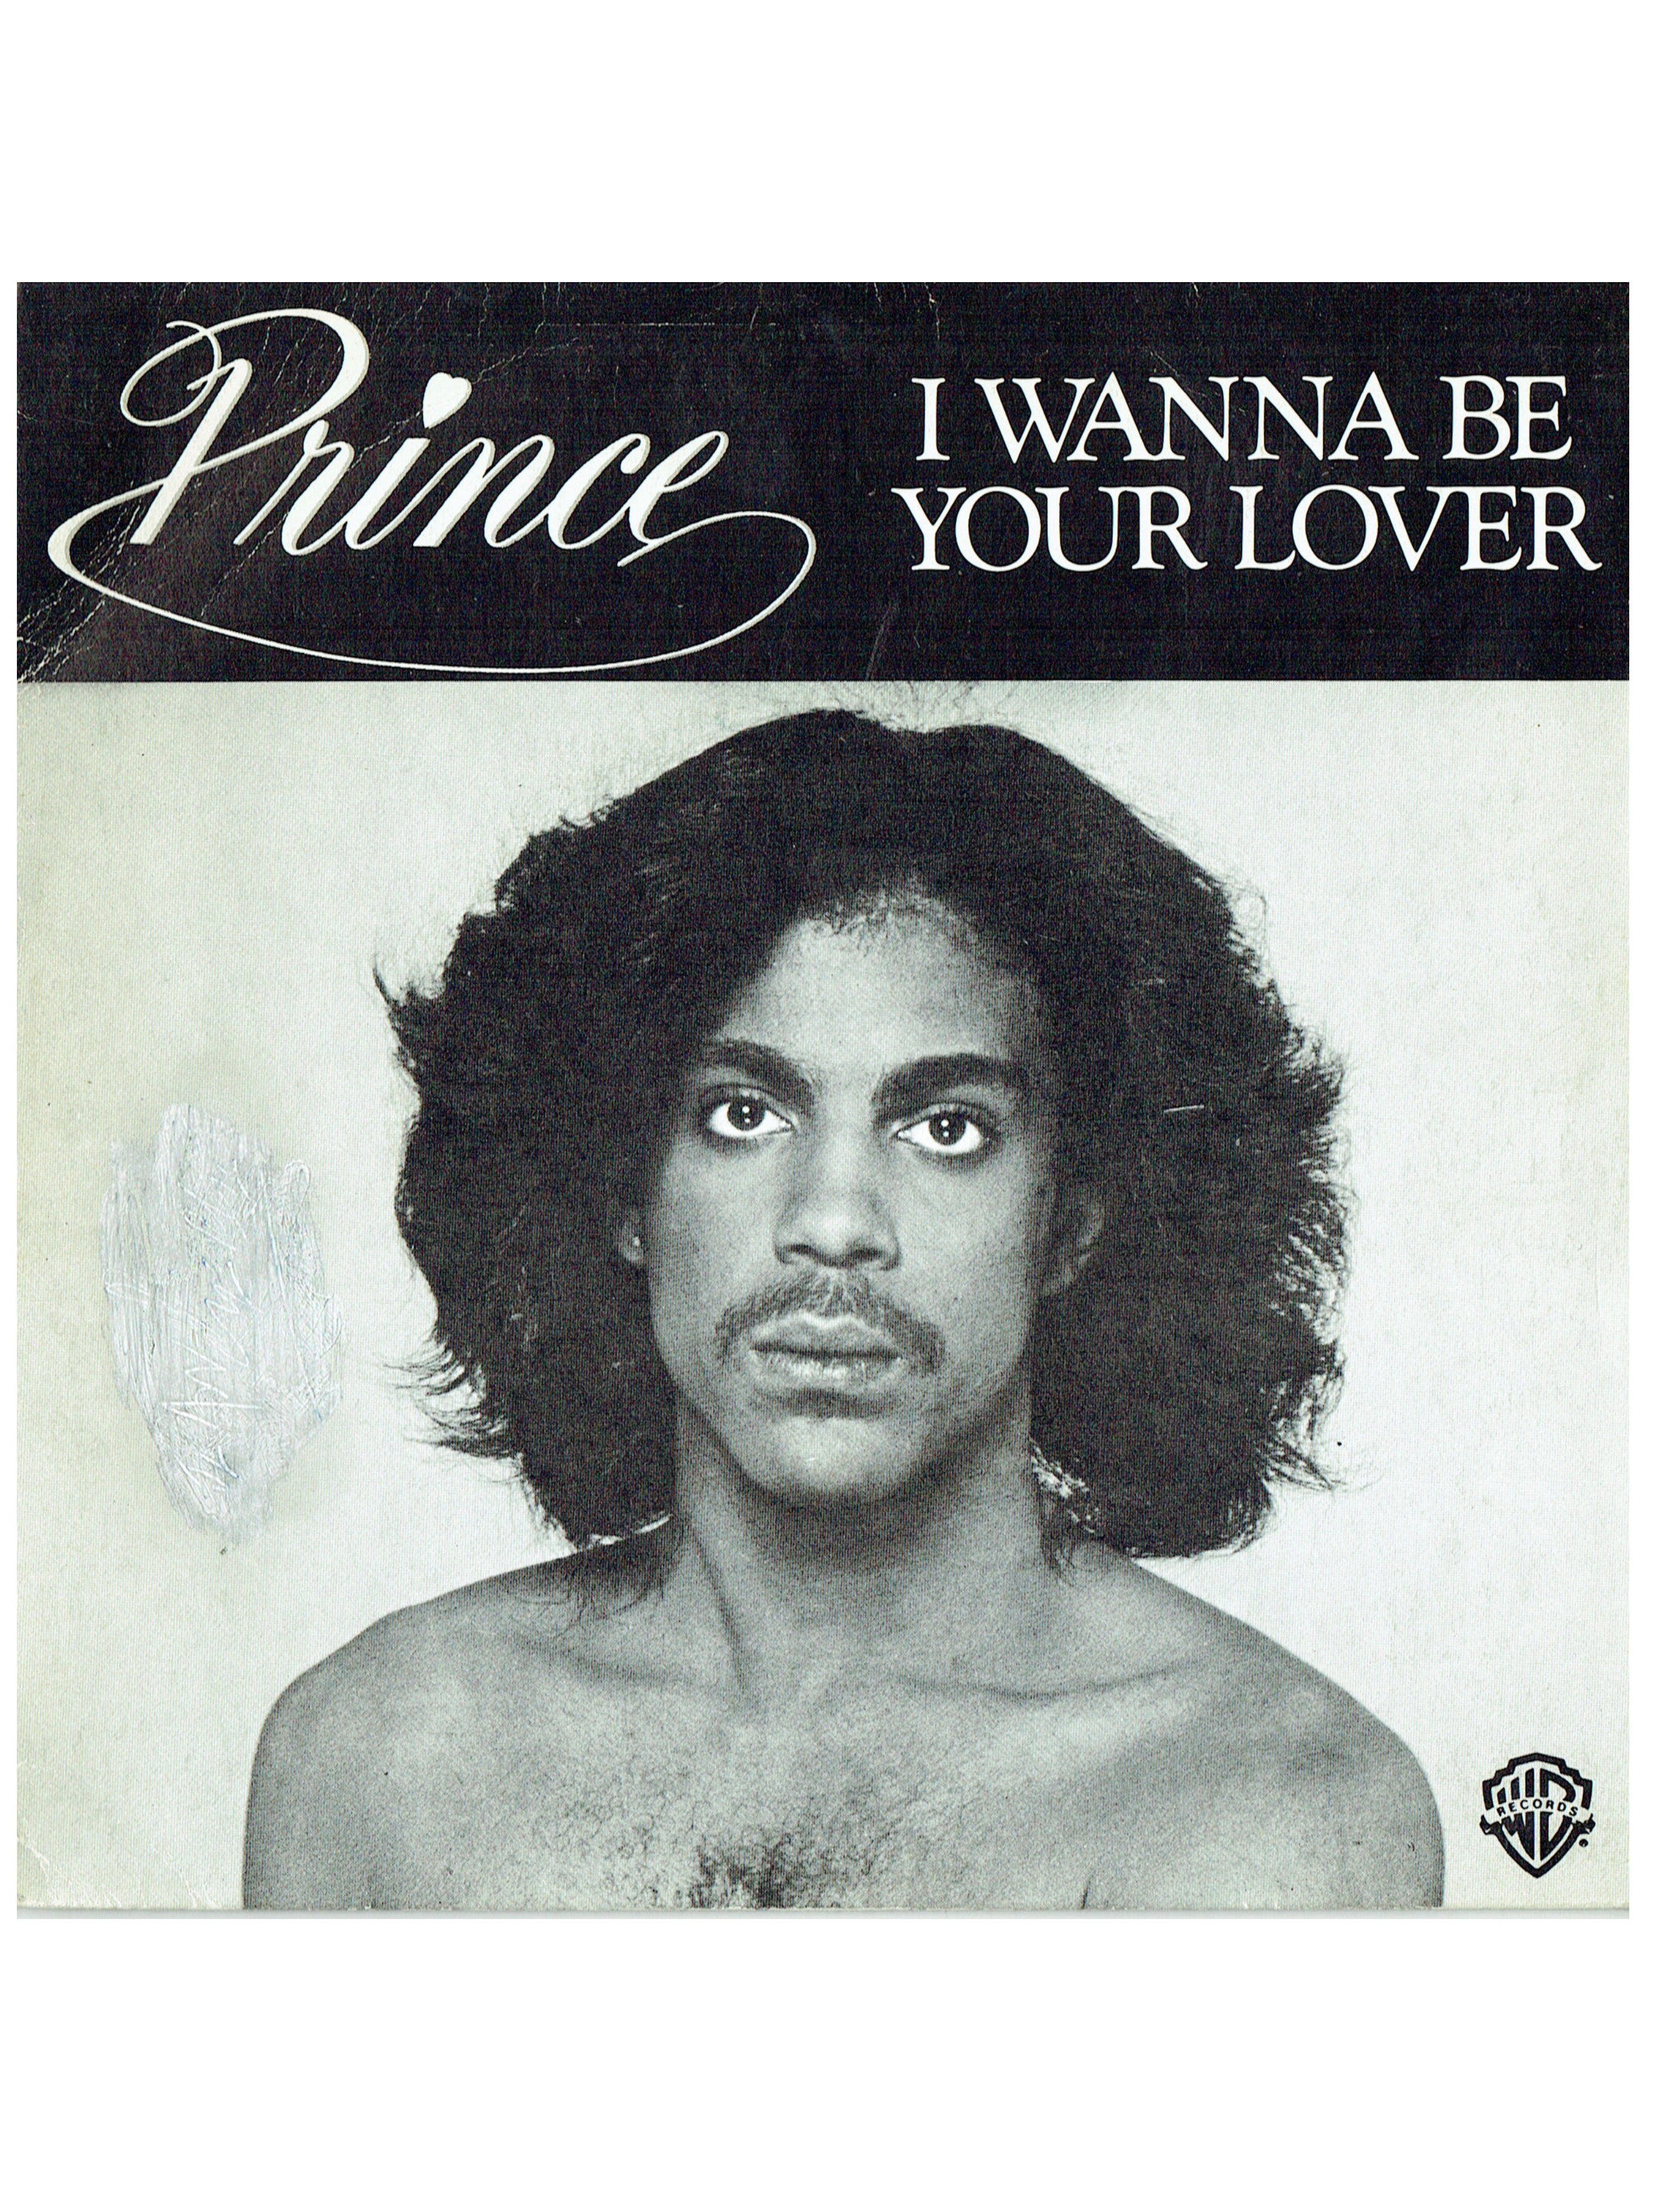 The perfect prince loves me. Prince Prince 1979. Prince i wanna be your lover. Принс 70-е i wanna be your lover. I wanna be your Love.